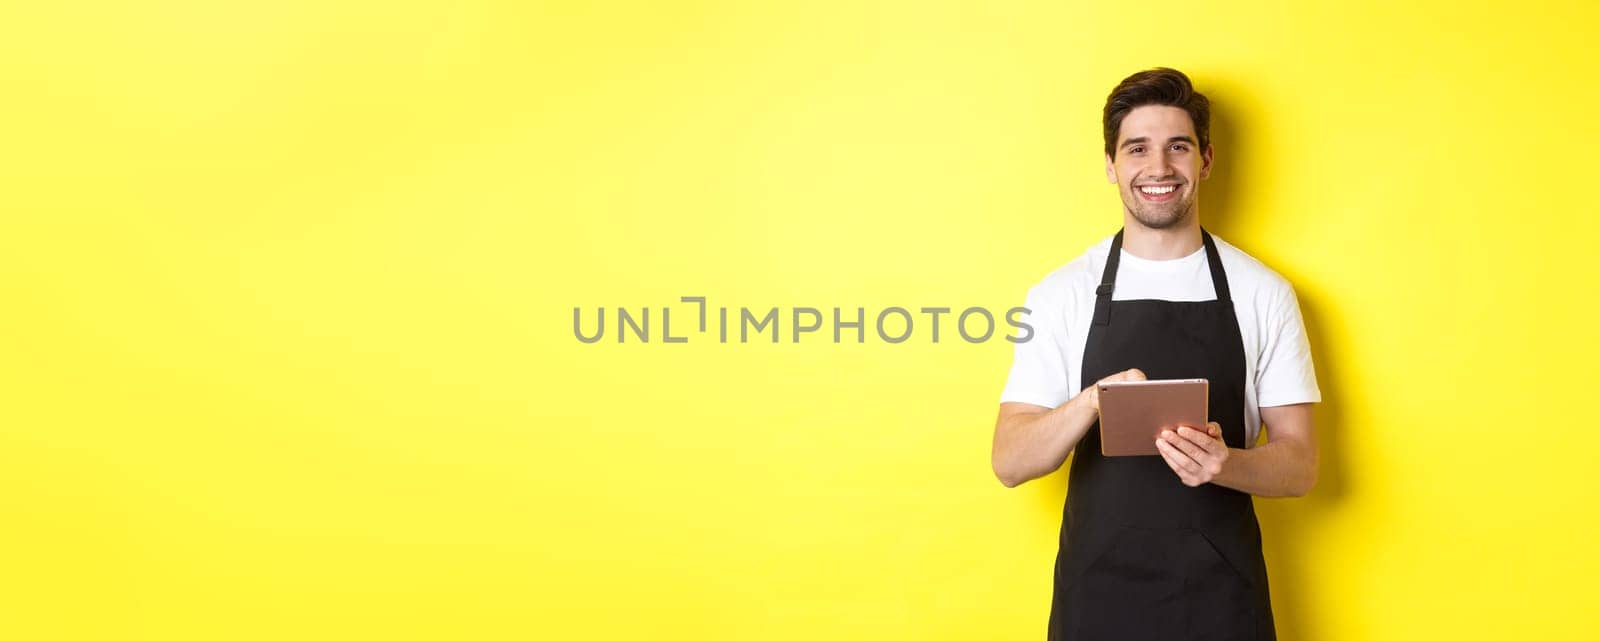 Handsome waiter taking orders, holding digital tablet and smiling, wearing black apron uniform, standing over yellow background.